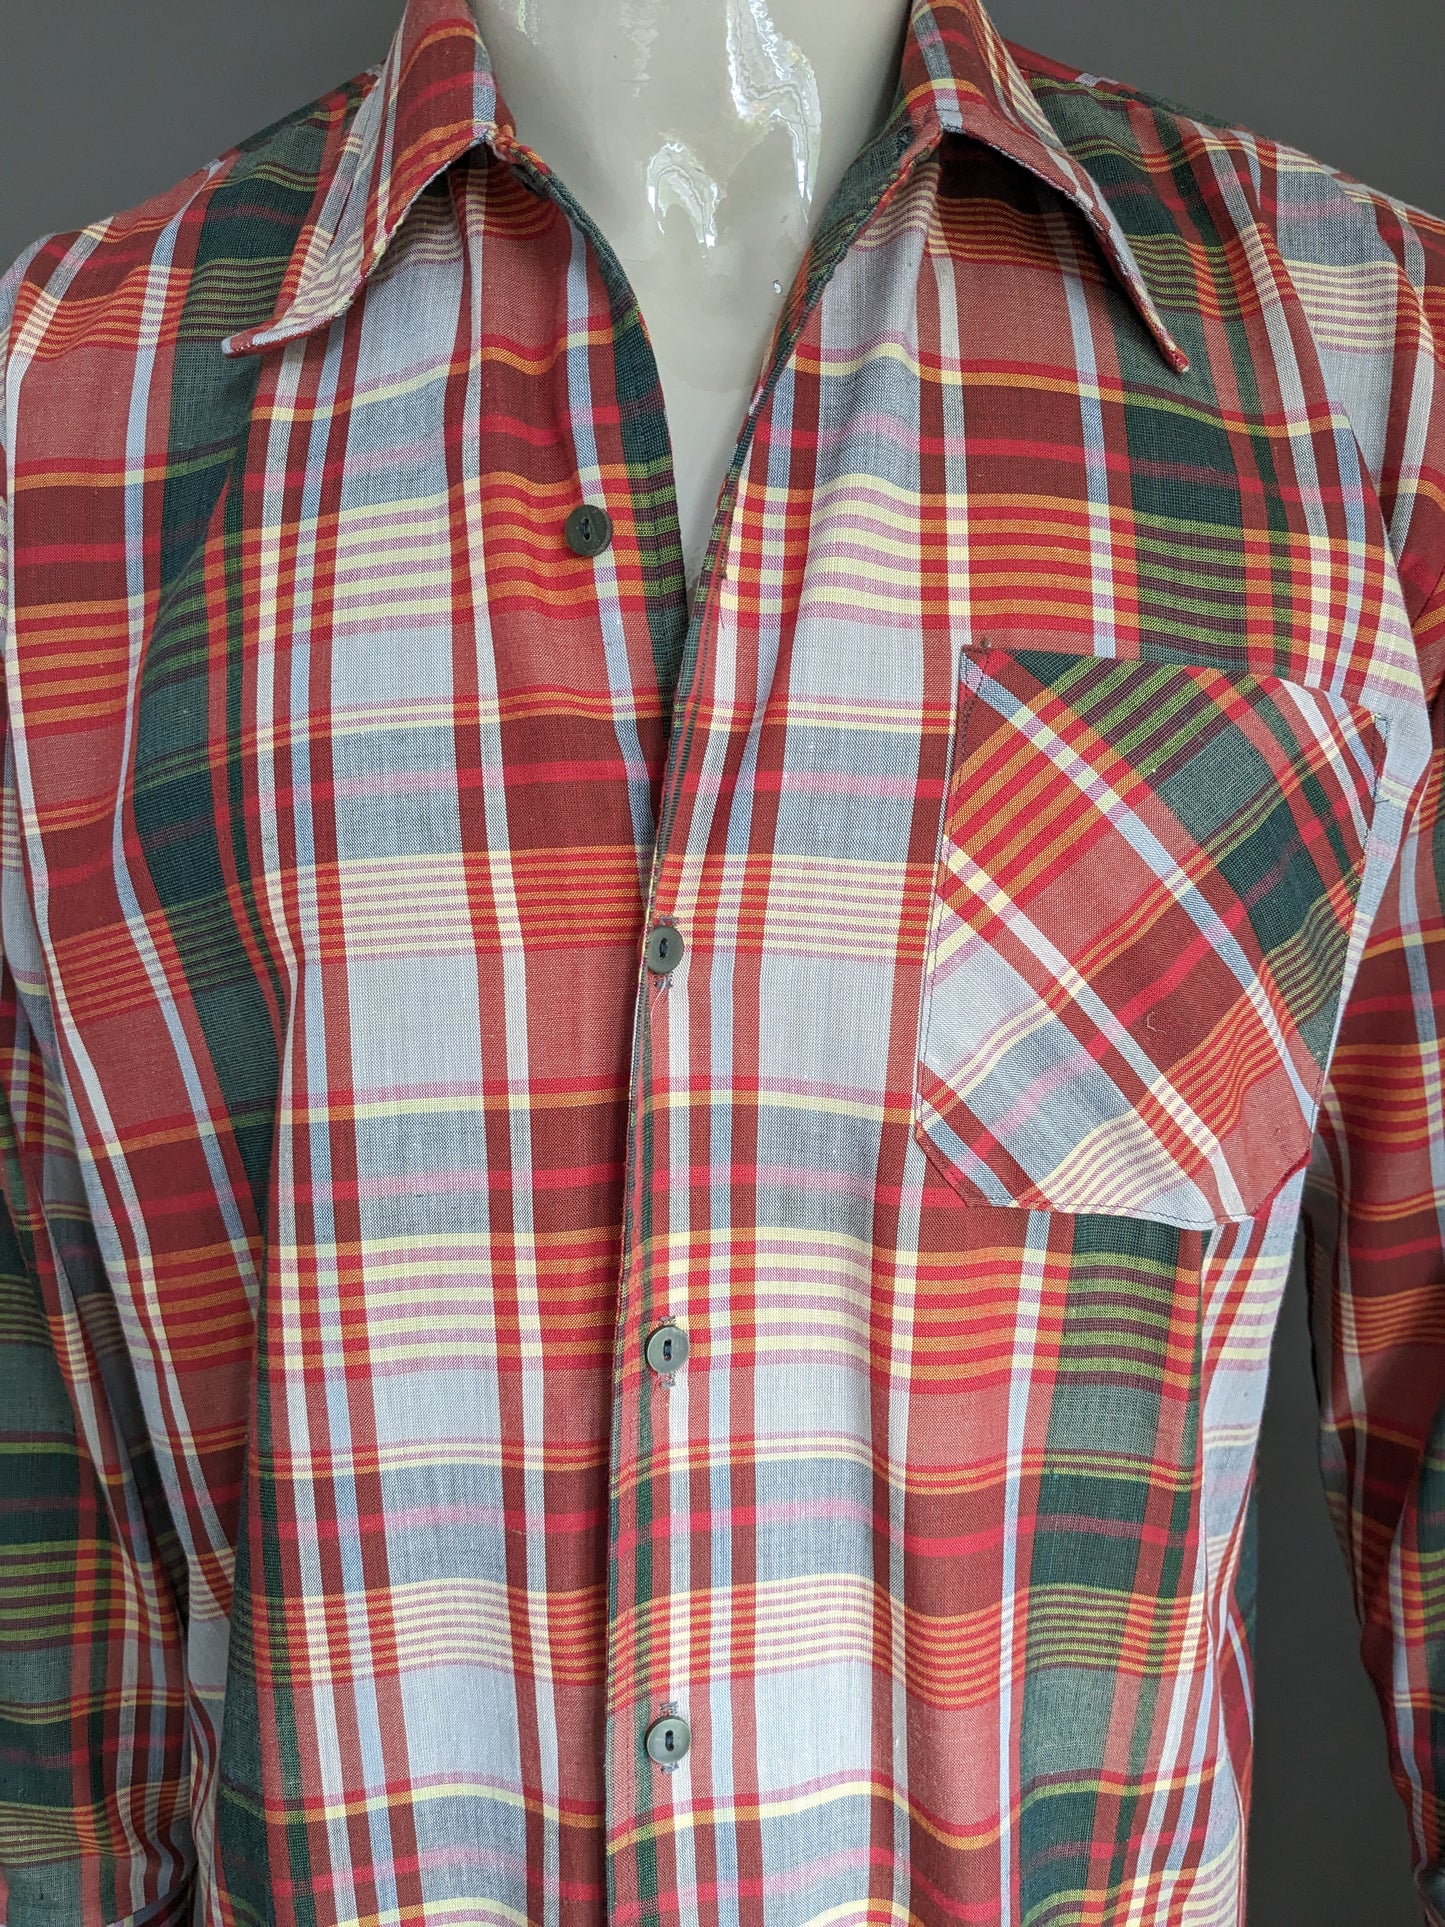 Vintage 70's shirt with point collar. Red green yellow checkered. Size XL.